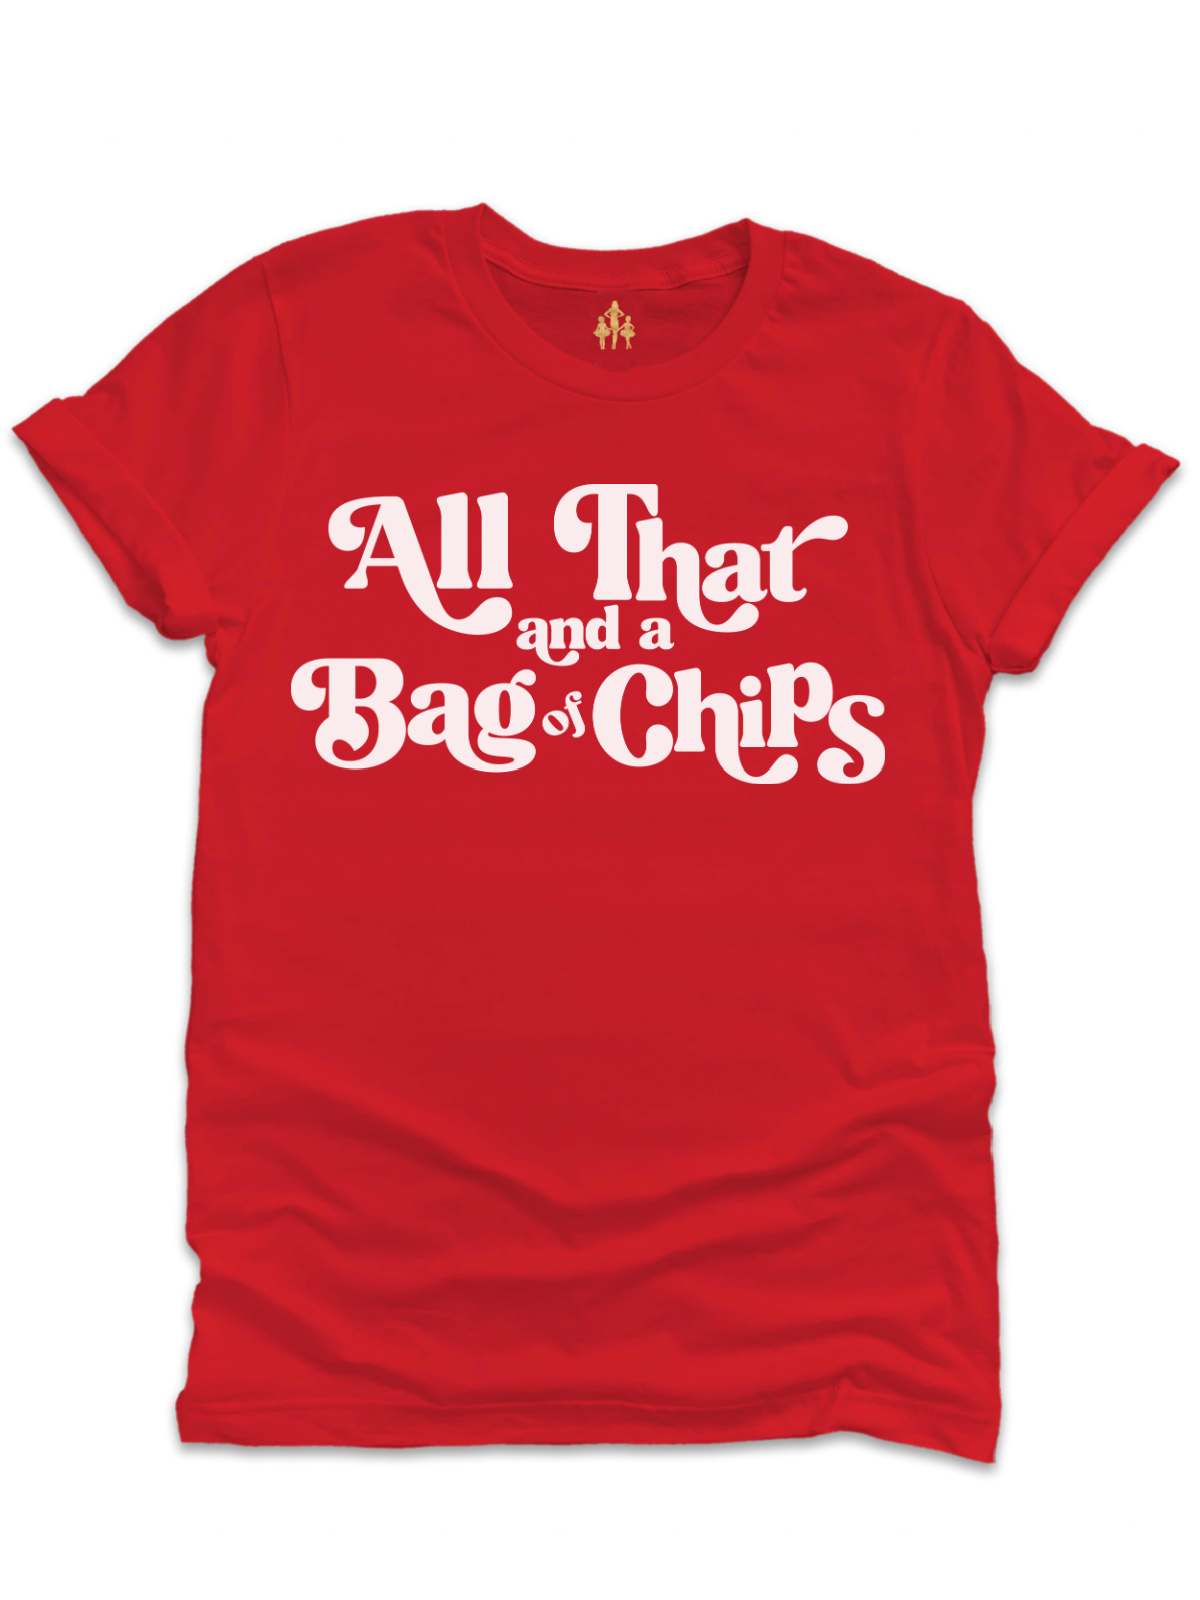 All That and a Bag of Chips 90s Retro Womens Shirt